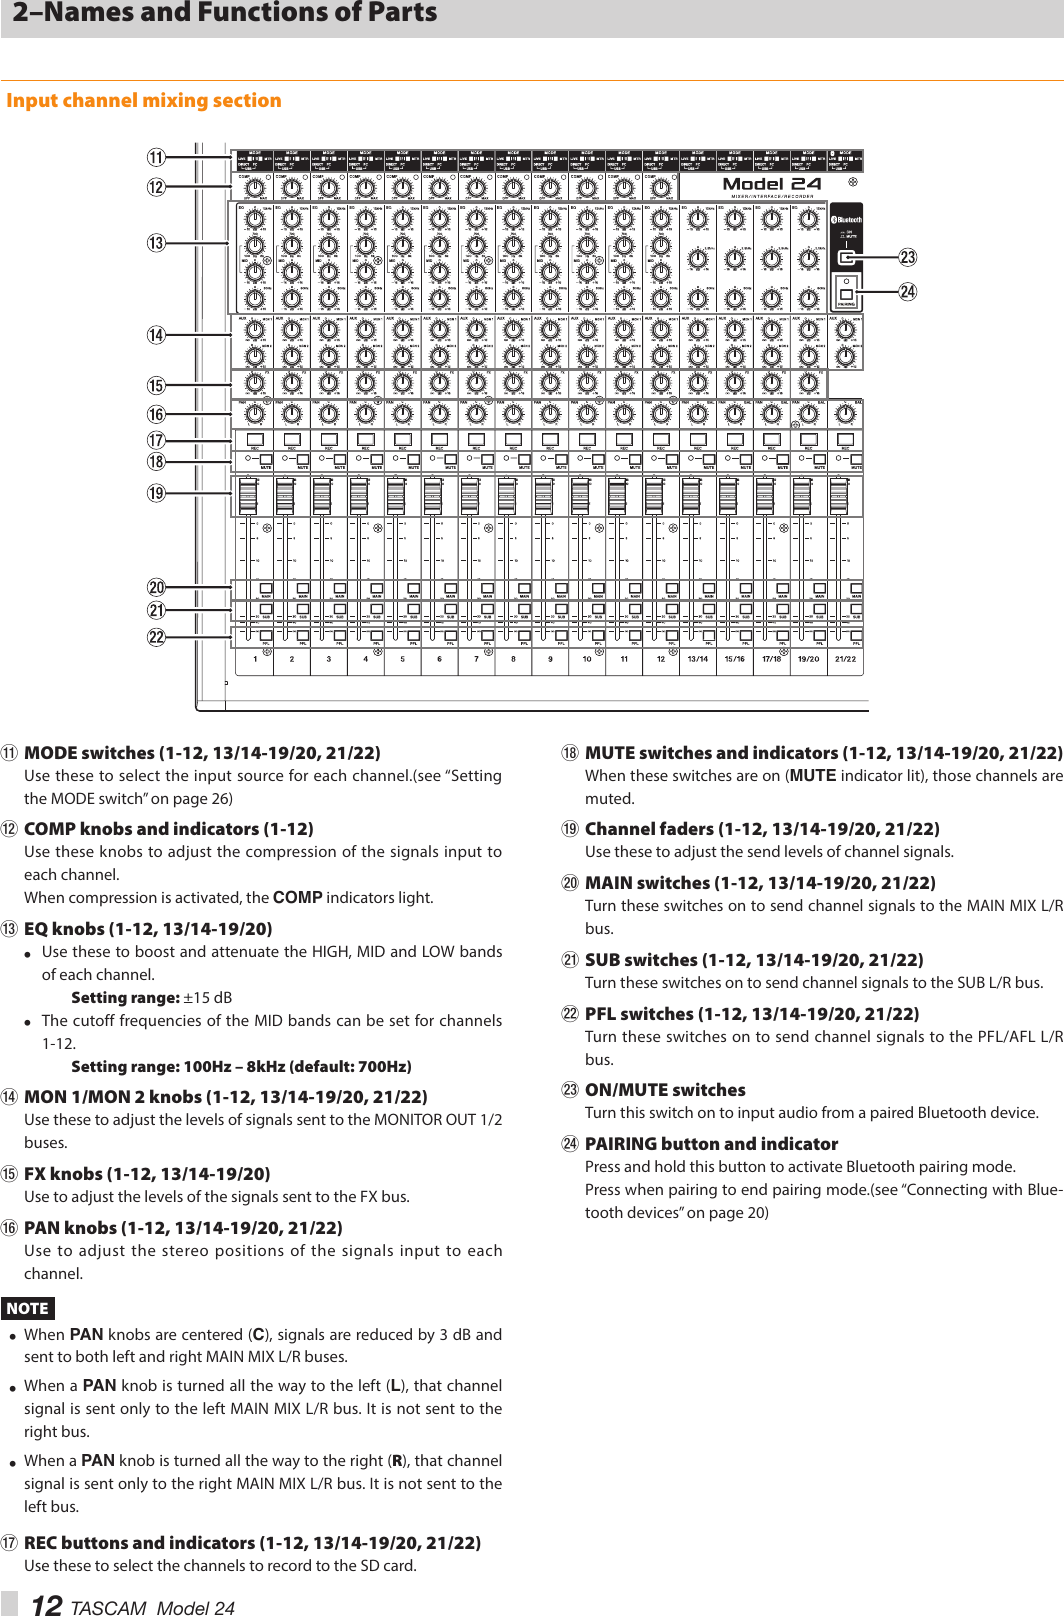 12 TASCAM  Model 242–Names and Functions of PartsInput channel mixing sectionq MODE switches (1-12, 13/14-19/20, 21/22)Use these to select the input source for each channel.(see “Setting the MODE switch” on page 26)w COMP knobs and indicators (1-12)Use these knobs to adjust the compression of the signals input to each channel.When compression is activated, the COMP indicators light.e EQ knobs (1-12, 13/14-19/20) i Use these to boost and attenuate the HIGH, MID and LOW bands of each channel.Setting range: ±15 dB i The cutoff frequencies of the MID bands can be set for channels 1-12.Setting range: 100Hz – 8kHz (default: 700Hz)r MON 1/MON 2 knobs (1-12, 13/14-19/20, 21/22)Use these to adjust the levels of signals sent to the MONITOR OUT 1/2 buses.t FX knobs (1-12, 13/14-19/20)Use to adjust the levels of the signals sent to the FX bus.y PAN knobs (1-12, 13/14-19/20, 21/22)Use to adjust the stereo positions of the signals input to each channel.NOTE i When PAN knobs are centered (C), signals are reduced by 3 dB and sent to both left and right MAIN MIX L/R buses. i When a PAN knob is turned all the way to the left (L), that channel signal is sent only to the left MAIN MIX L/R bus. It is not sent to the right bus. i When a PAN knob is turned all the way to the right (R), that channel signal is sent only to the right MAIN MIX L/R bus. It is not sent to the left bus.u REC buttons and indicators (1-12, 13/14-19/20, 21/22)Use these to select the channels to record to the SD card.i MUTE switches and indicators (1-12, 13/14-19/20, 21/22)When these switches are on (MUTE indicator lit), those channels are muted.o Channel faders (1-12, 13/14-19/20, 21/22)Use these to adjust the send levels of channel signals.p MAIN switches (1-12, 13/14-19/20, 21/22)Turn these switches on to send channel signals to the MAIN MIX L/R bus.a SUB switches (1-12, 13/14-19/20, 21/22)Turn these switches on to send channel signals to the SUB L/R bus.s PFL switches (1-12, 13/14-19/20, 21/22)Turn these switches on to send channel signals to the PFL/AFL L/R bus.d ON/MUTE switchesTurn this switch on to input audio from a paired Bluetooth device.f PAIRING button and indicatorPress and hold this button to activate Bluetooth pairing mode.Press when pairing to end pairing mode.(see “Connecting with Blue-tooth devices” on page 20)